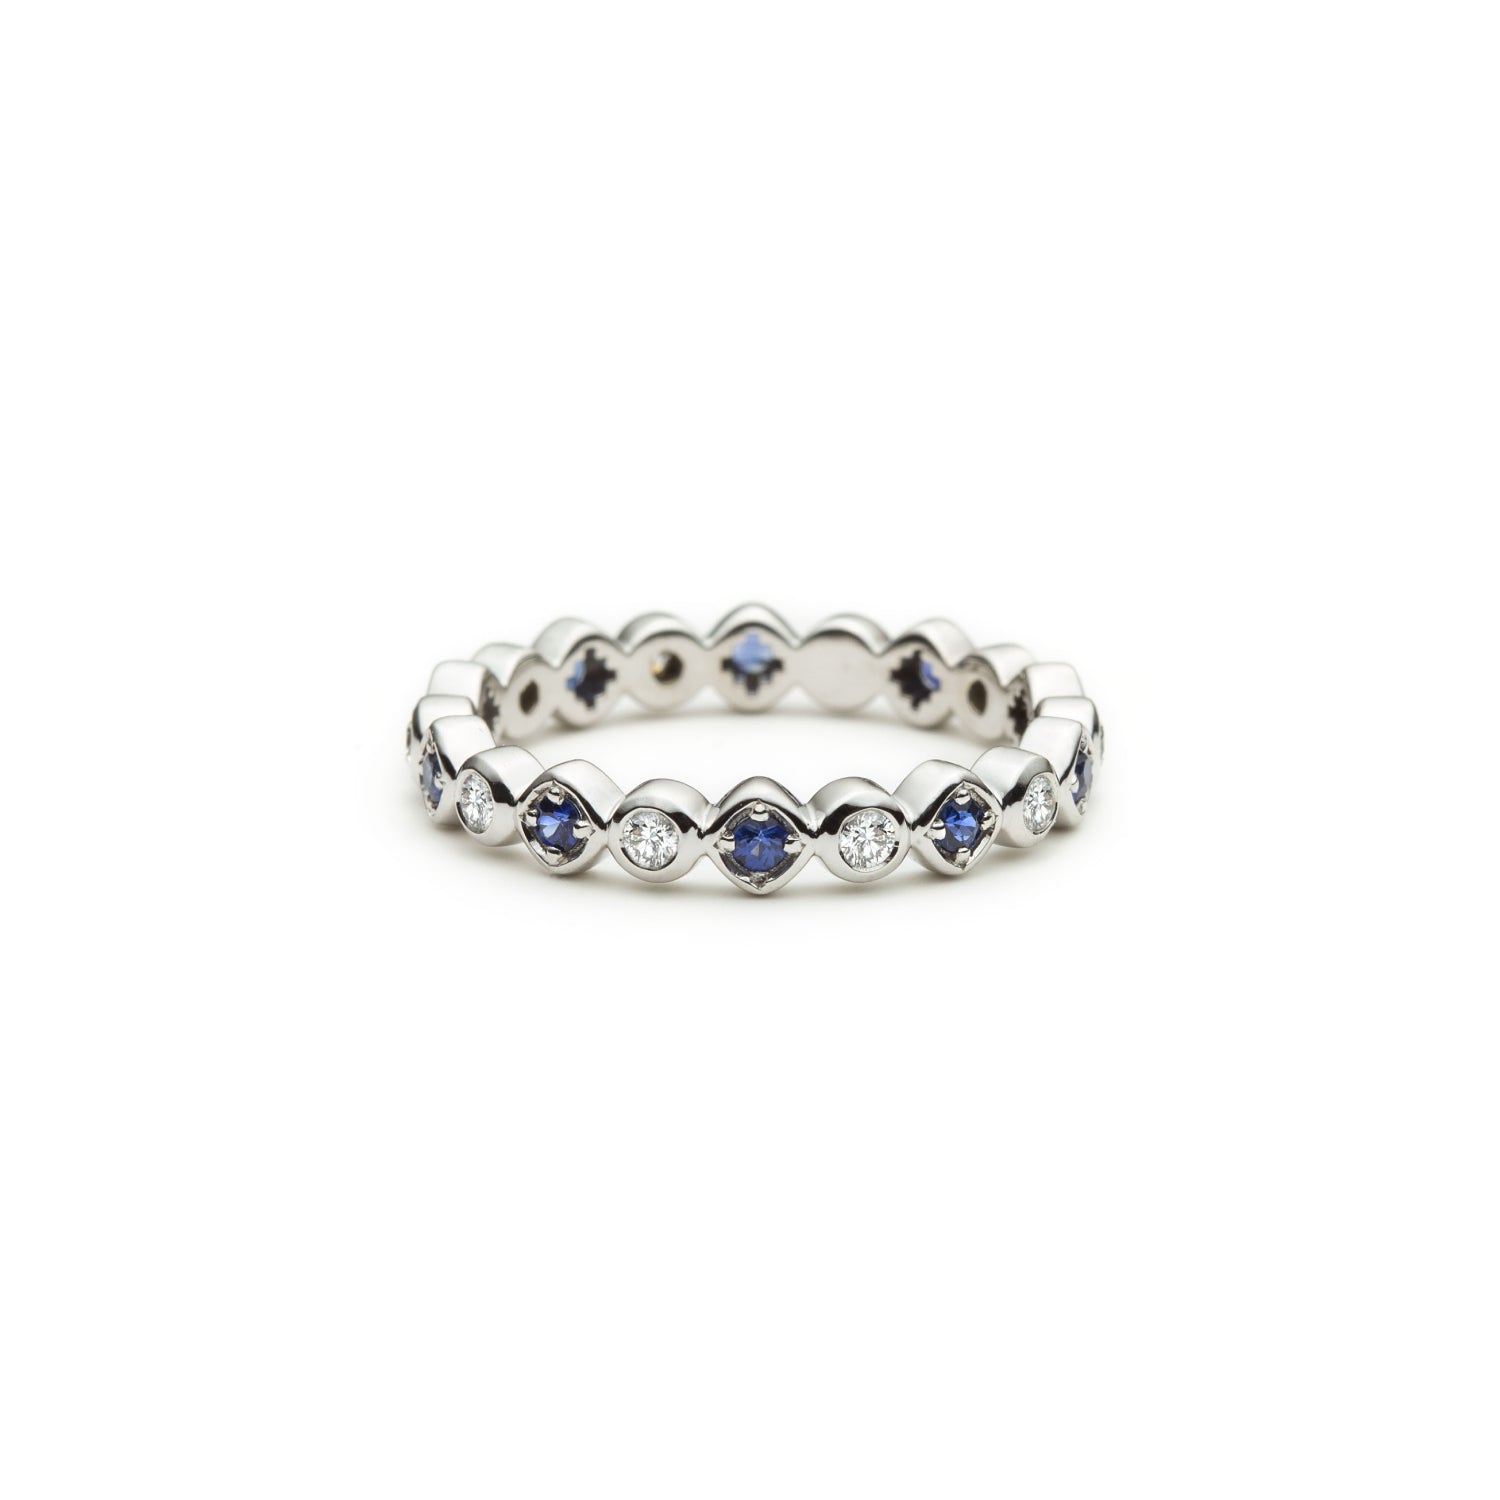 Alternating Round Brilliant Cut Diamond and Sapphire Eternity Ring in White Gold